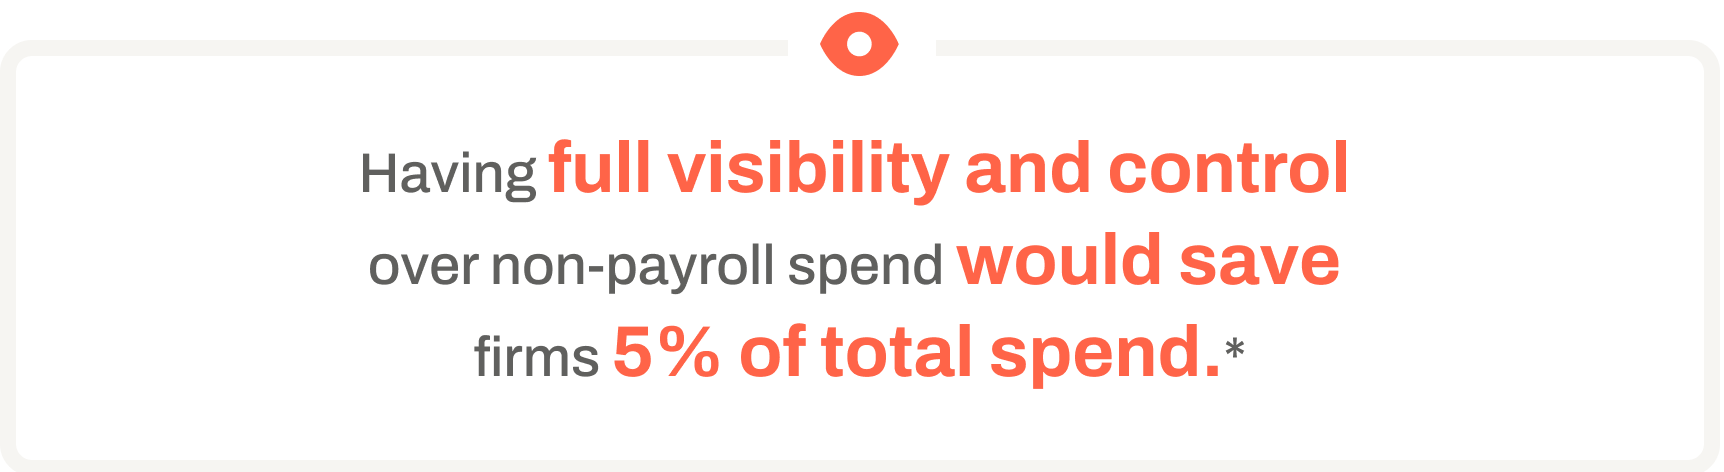 Having full visibility and control  over non-payroll spend would save  firms 5% of total spend.*